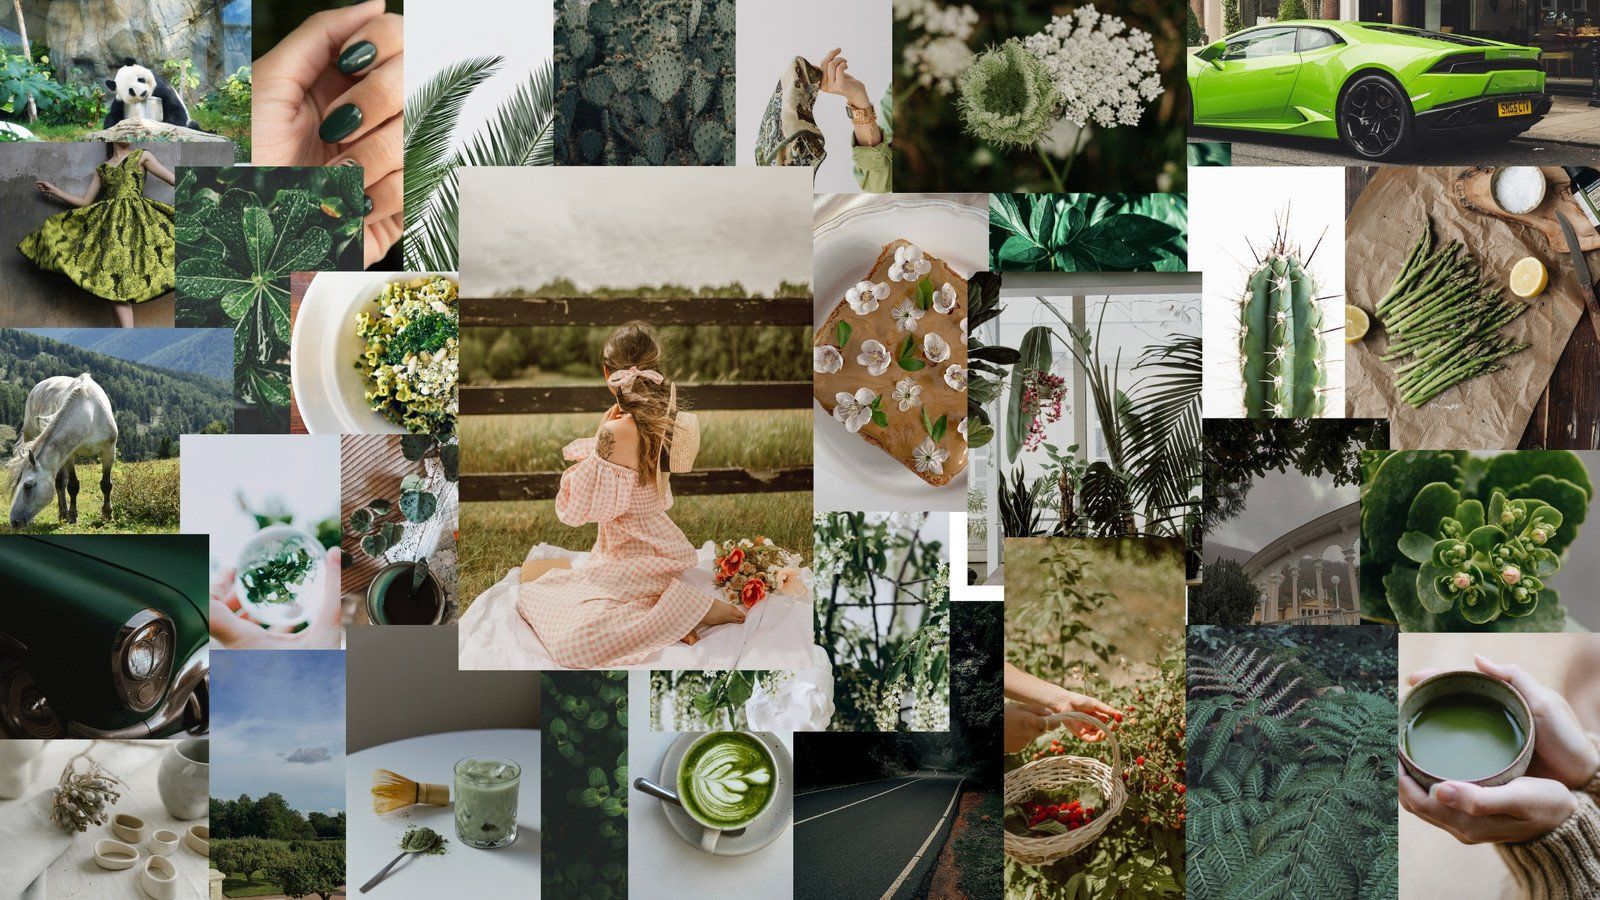 A collage of images of greenery, people, and things that are green. - Dark green